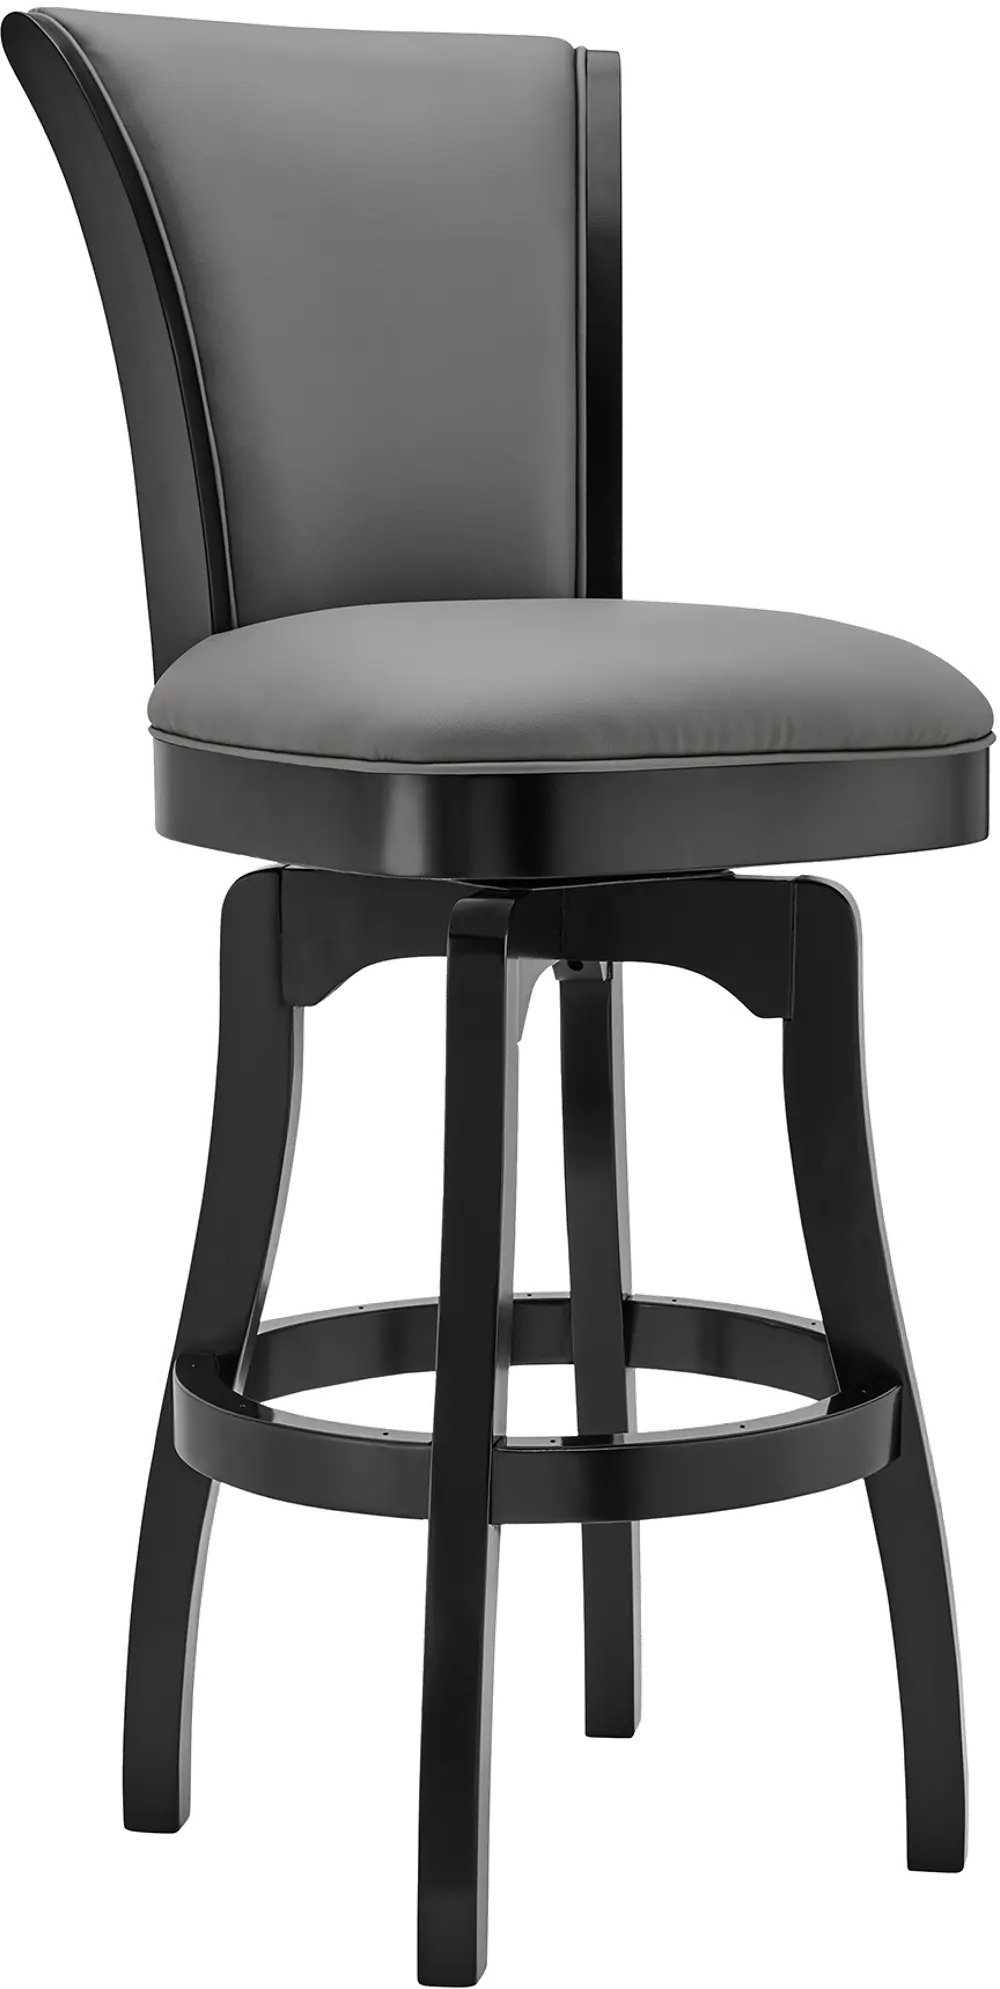 LCRABASIBLGR26 Raleigh Black Swivel Counter Height Stool-1